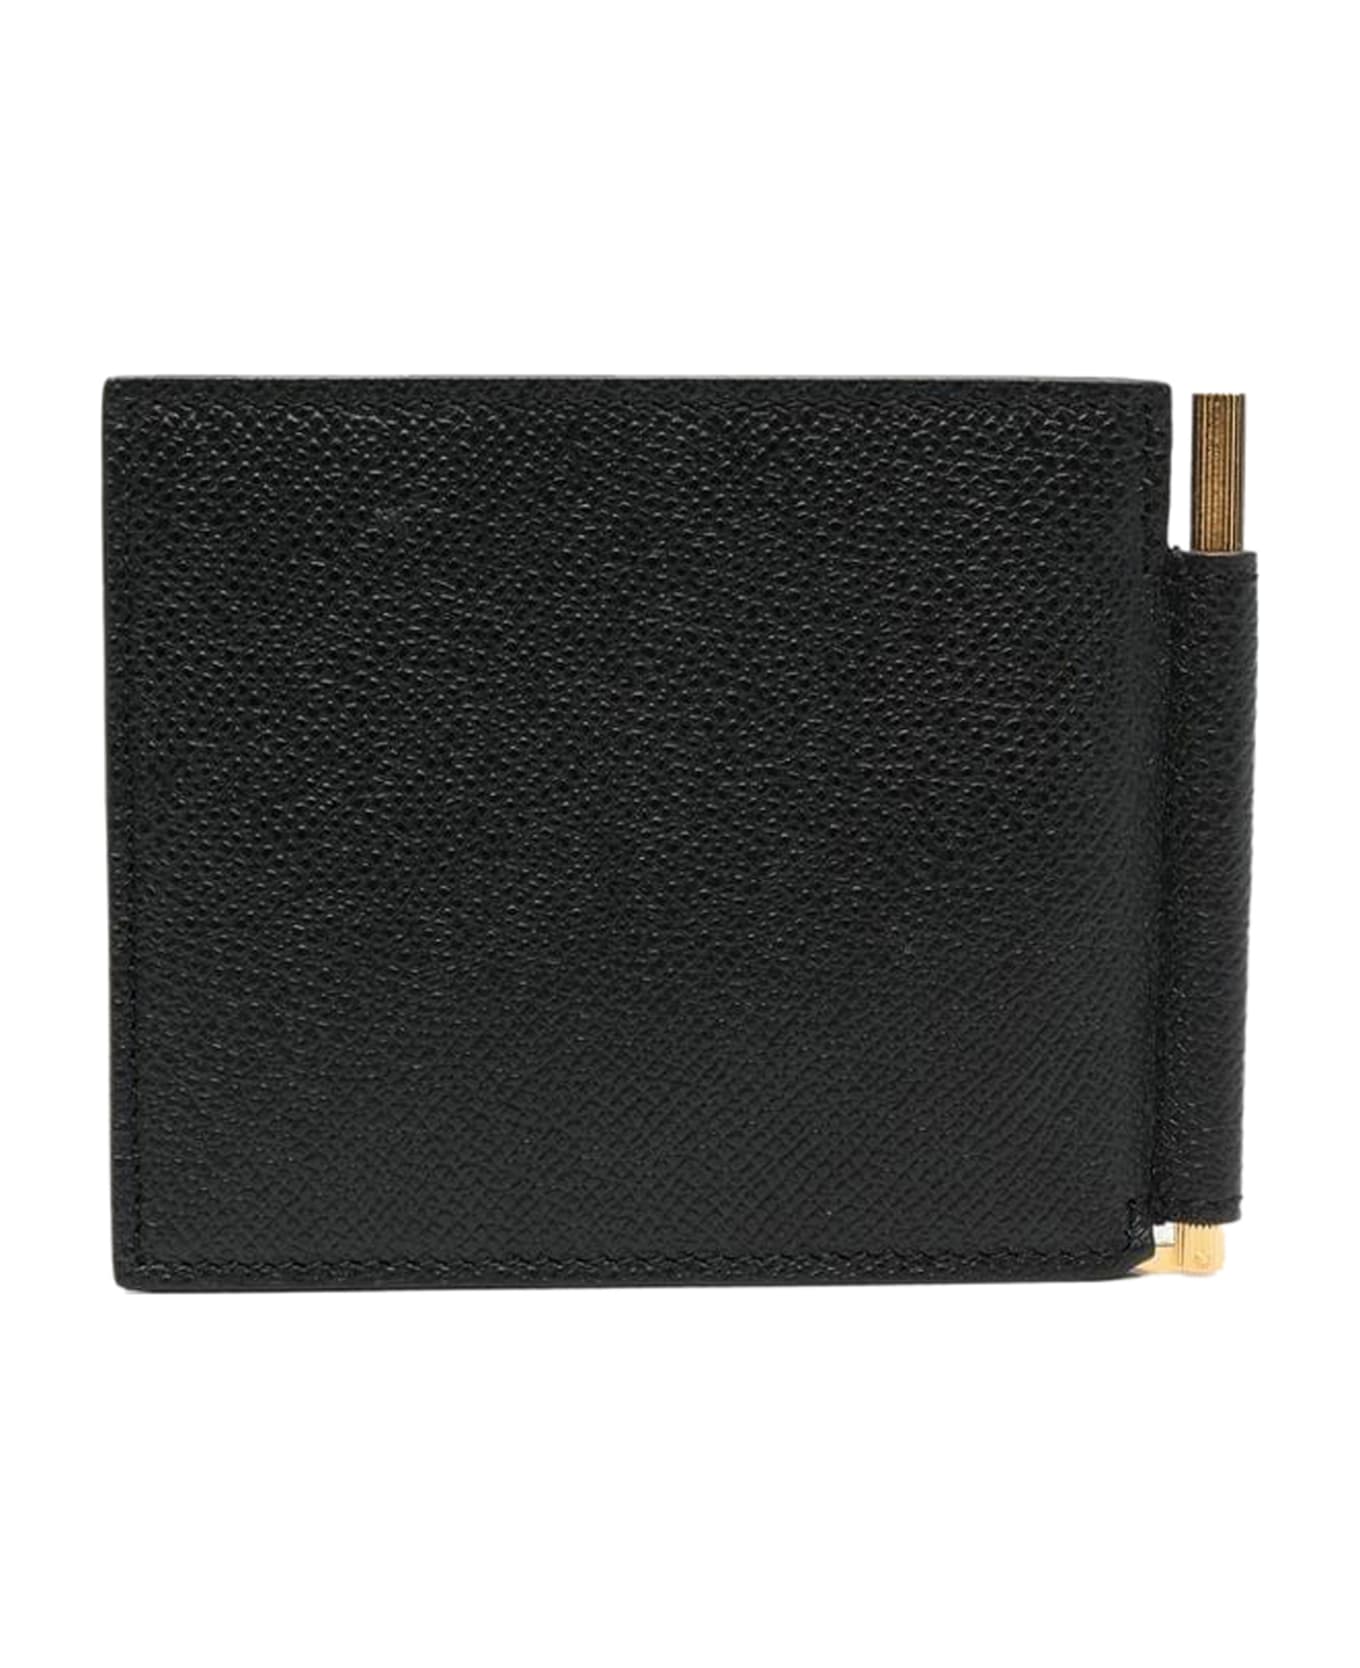 Tom Ford Small Grain Leather T Line Money Clip Wallet - Black